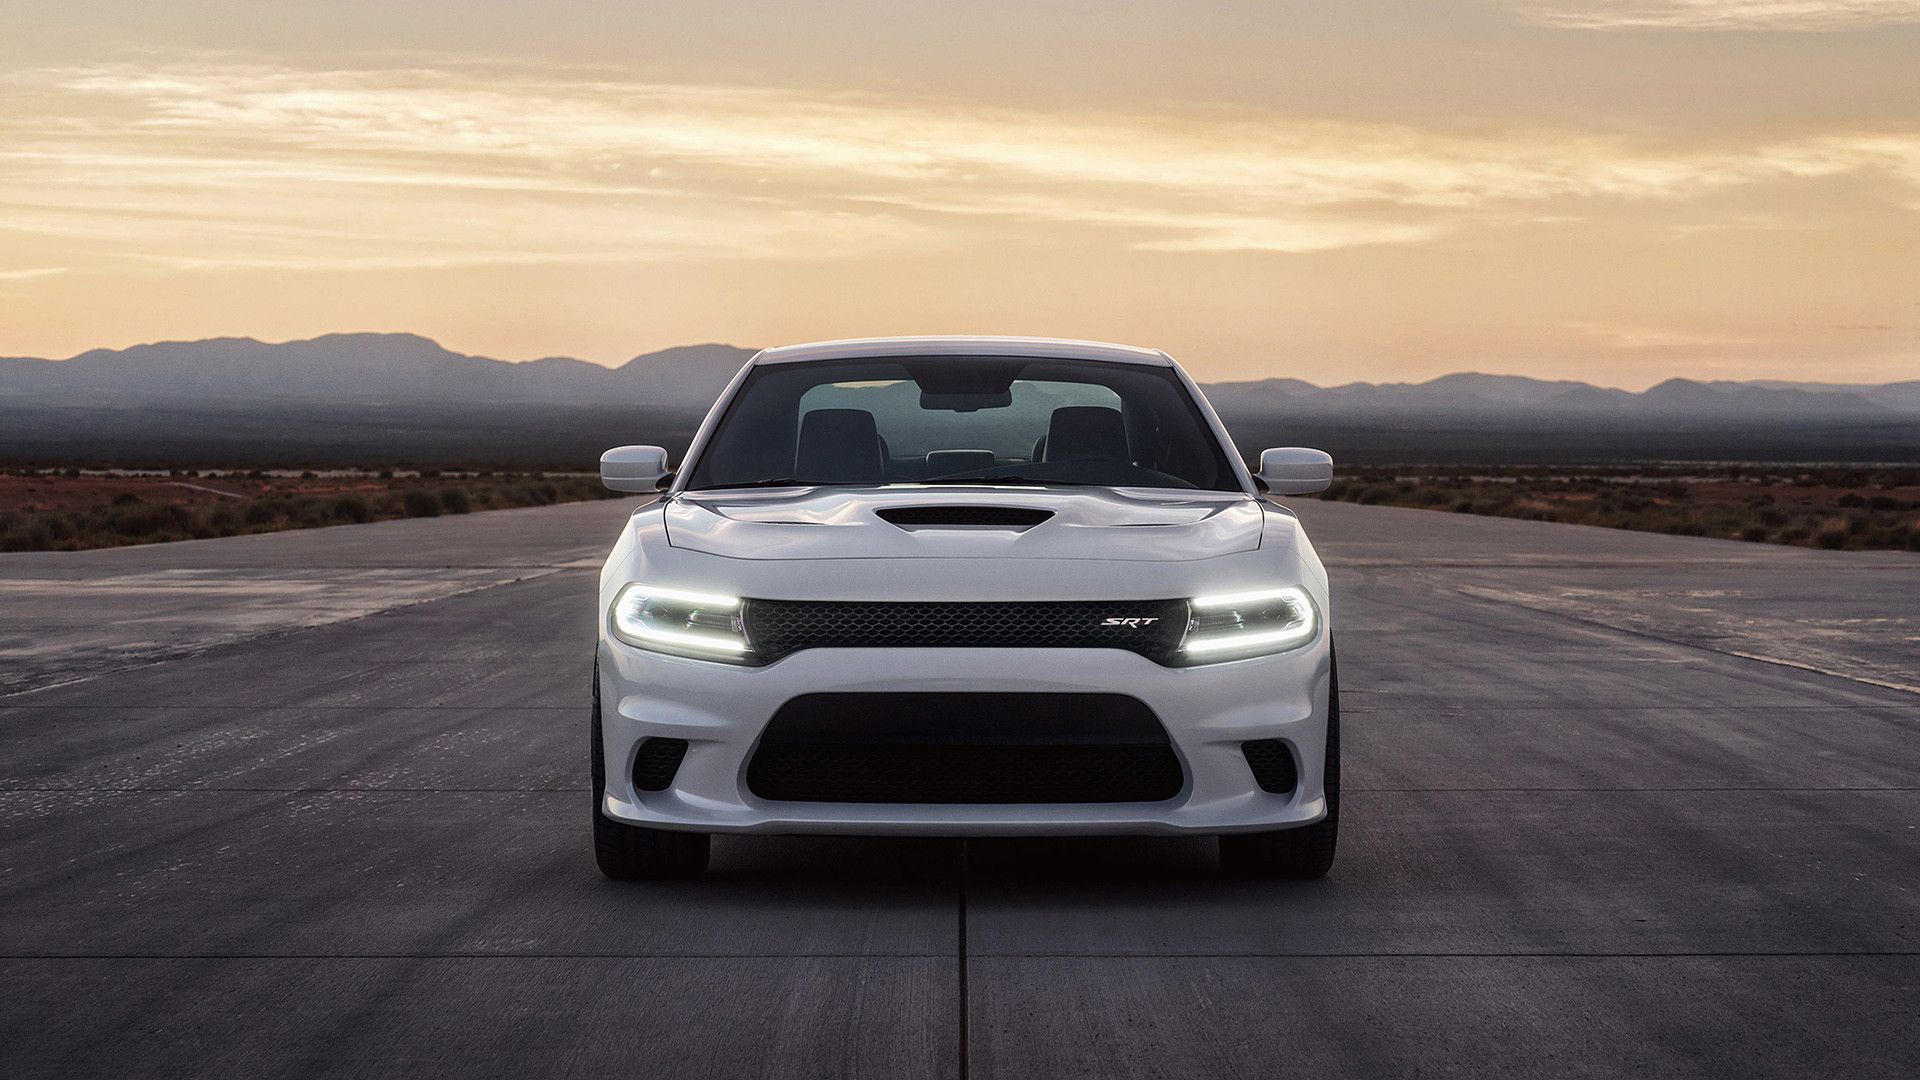 Free download 68 Charger Hellcat Wallpaper [1920x1080] for your Desktop, Mobile & Tablet. Explore Dodge Charger SRT Wallpaper. Dodge Charger SRT Wallpaper, Dodge Charger Wallpaper, Dodge Charger Wallpaper